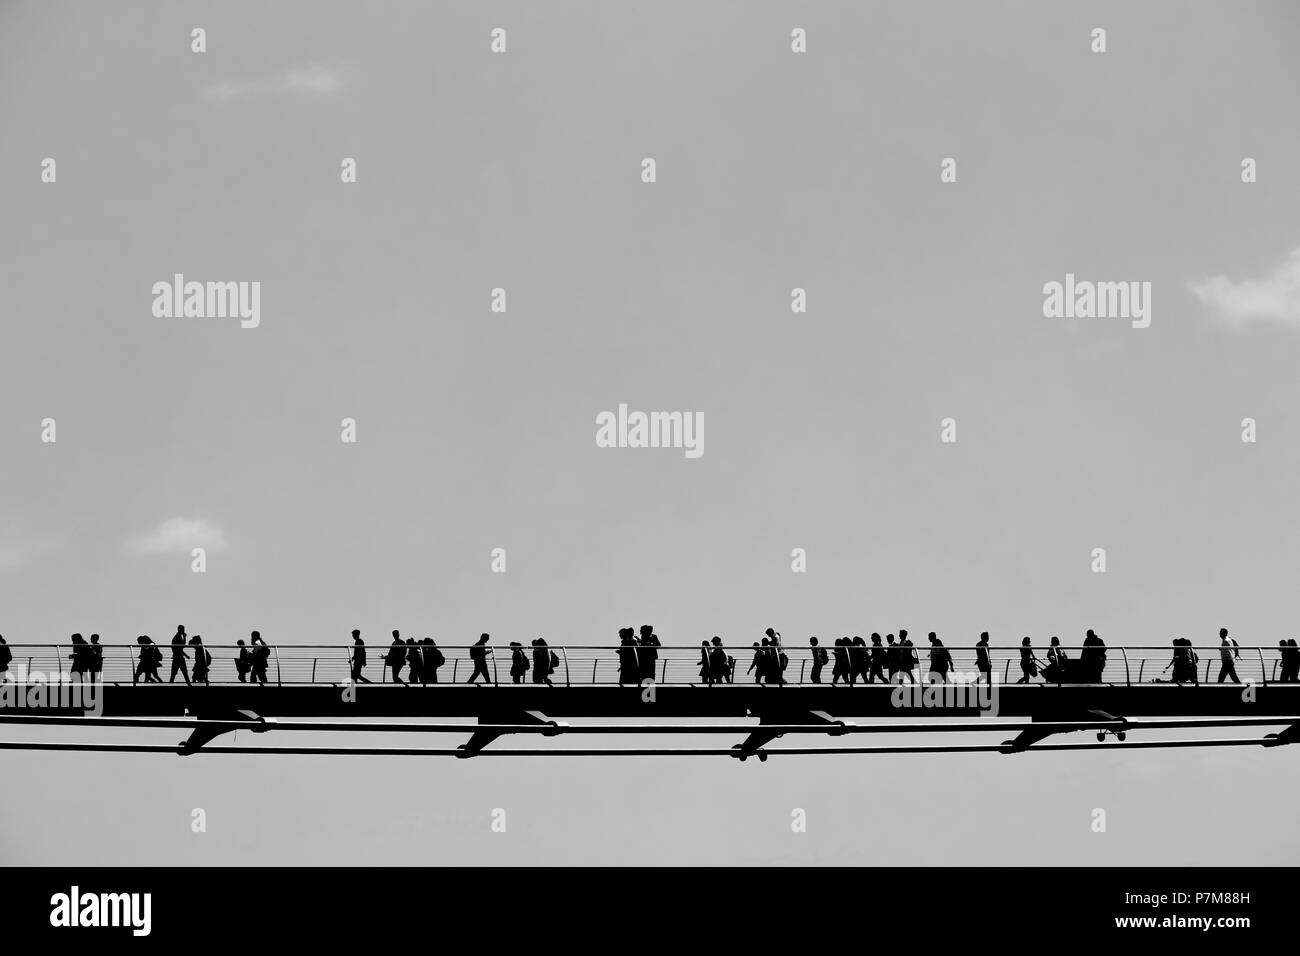 Many pedestrians walking across the London Millennium Footbridge are silhouetted against sky that has 3 little white clouds; copy space, black & white. Stock Photo